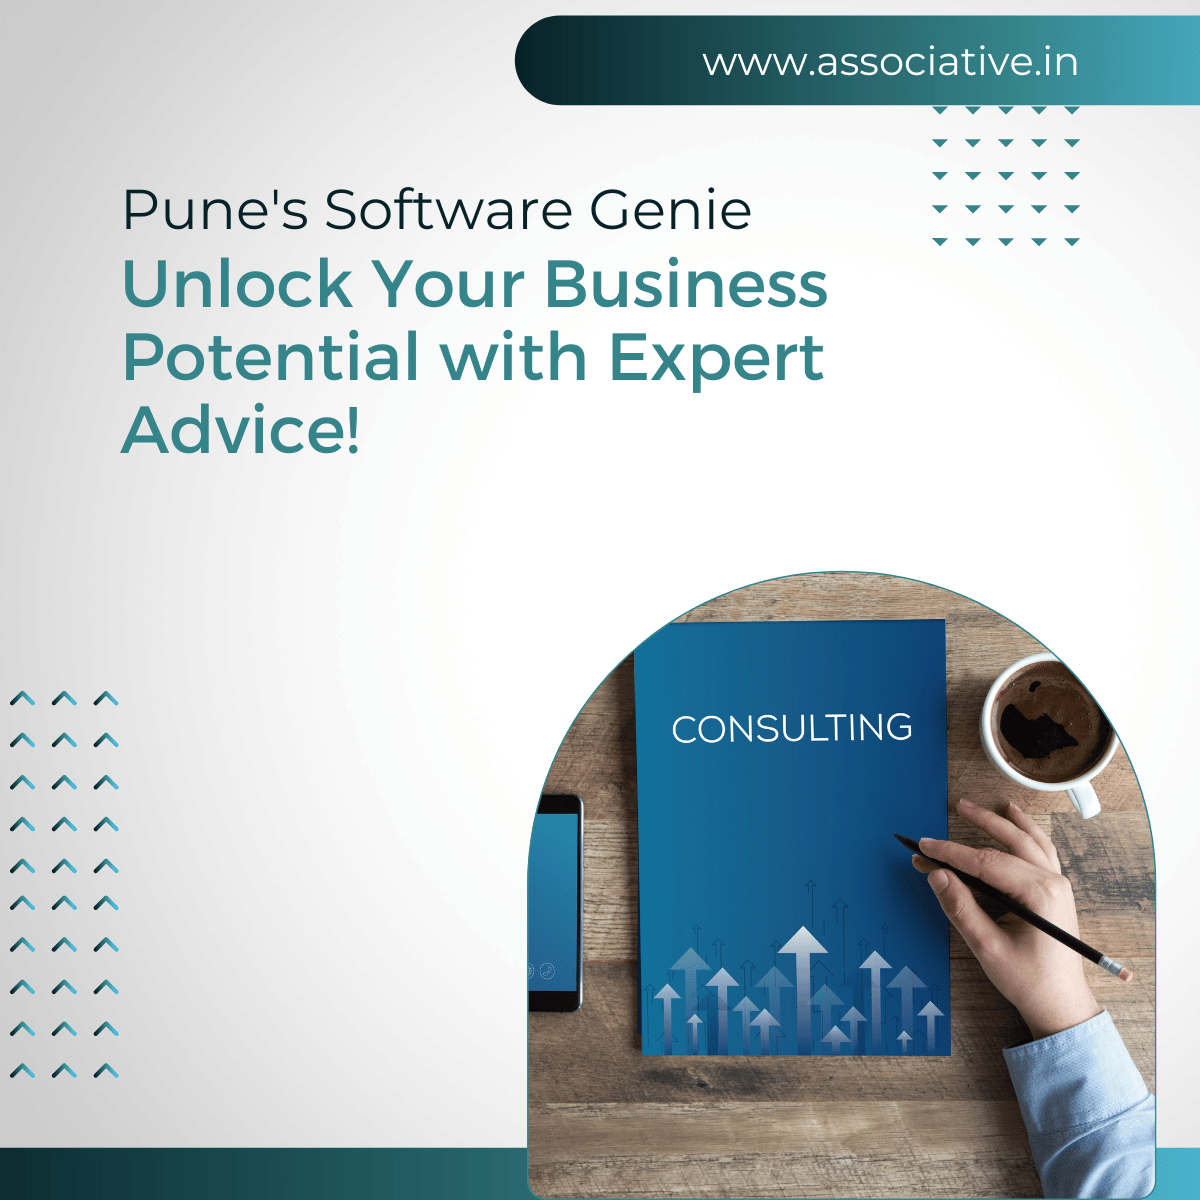 Pune's Software Genie: Unlock Your Business Potential with Expert Advice!